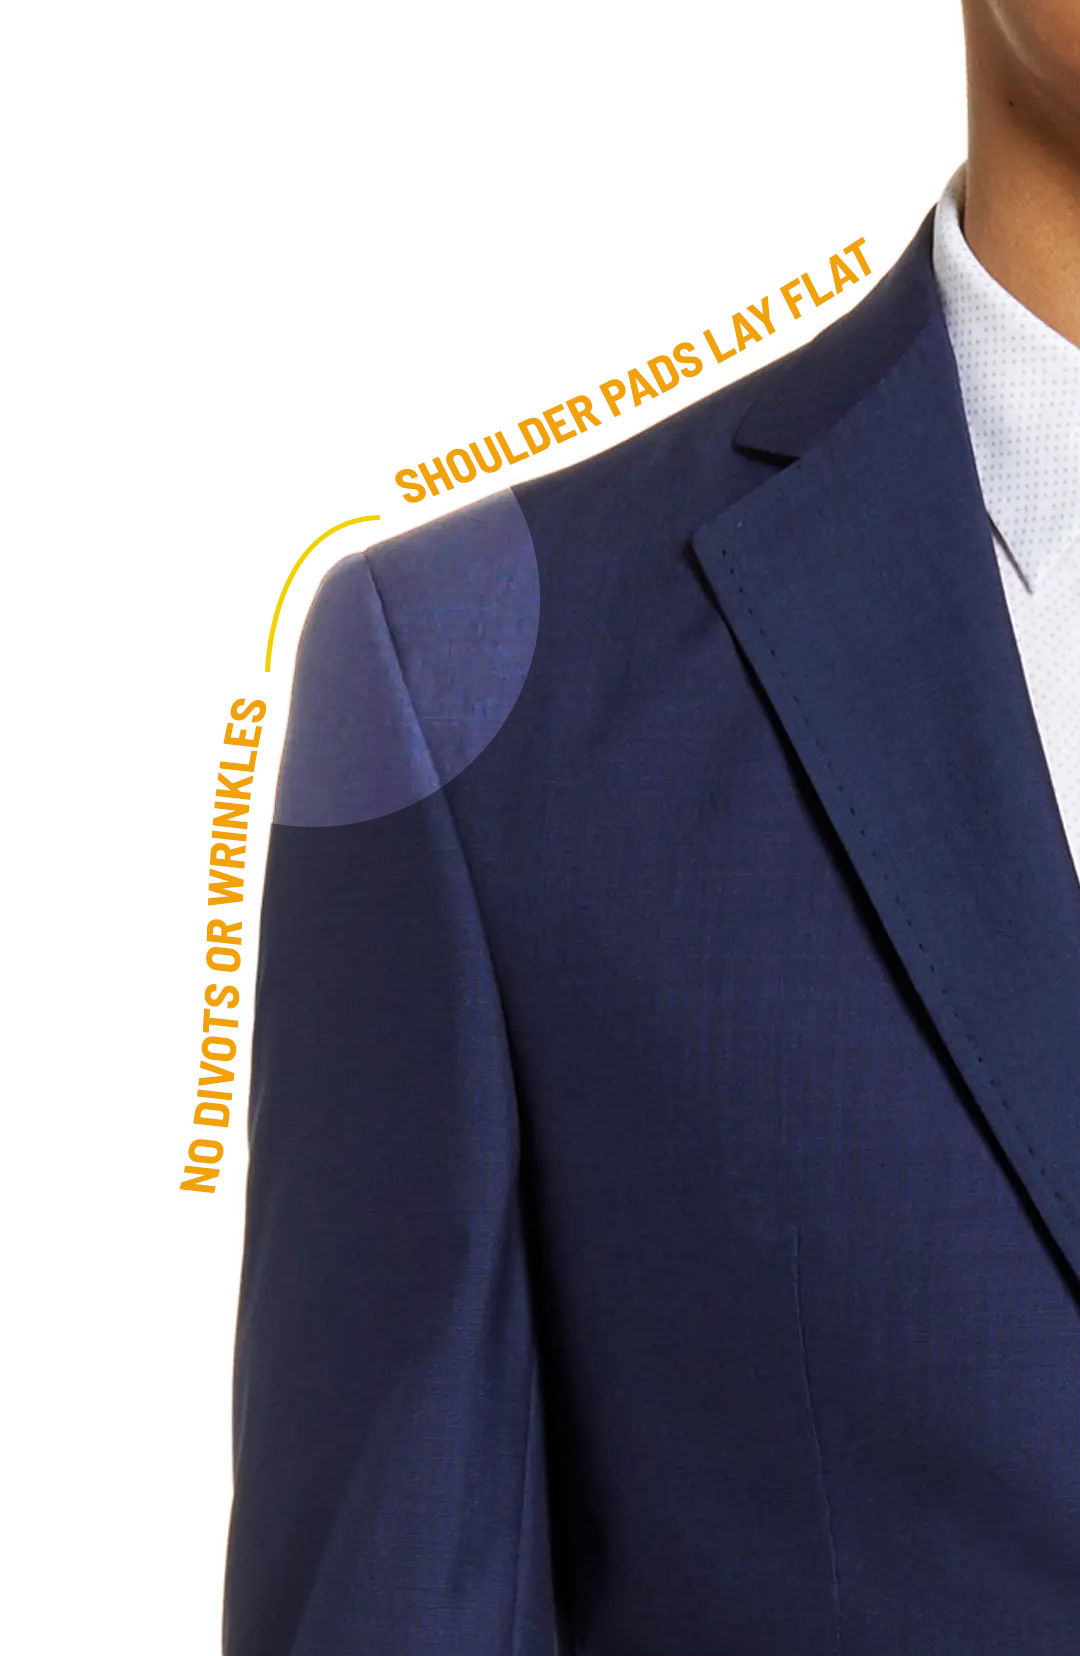 How should a suit fit: flat suit jacket sholders with no divots or wrinkles